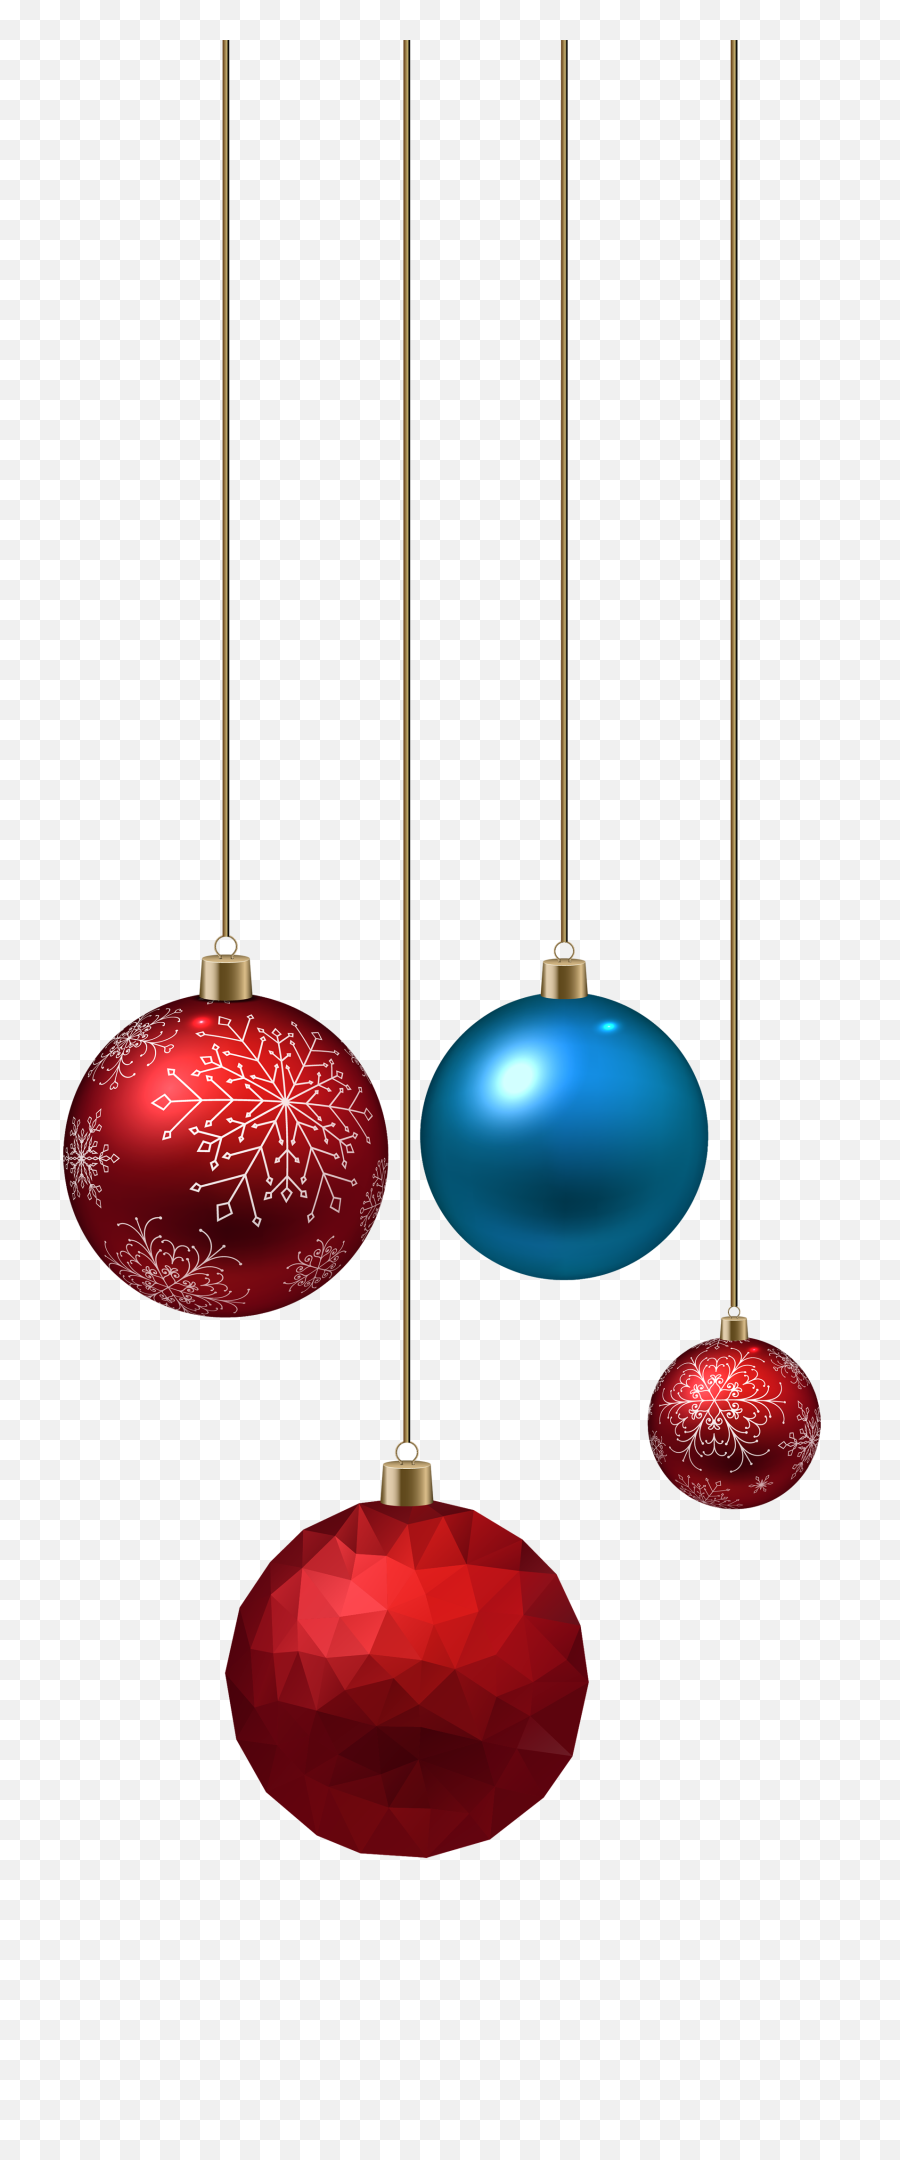 Blue And Red Christmas Ball Png Images - Christmas Balls Transparent Background,Ball Of Light Png